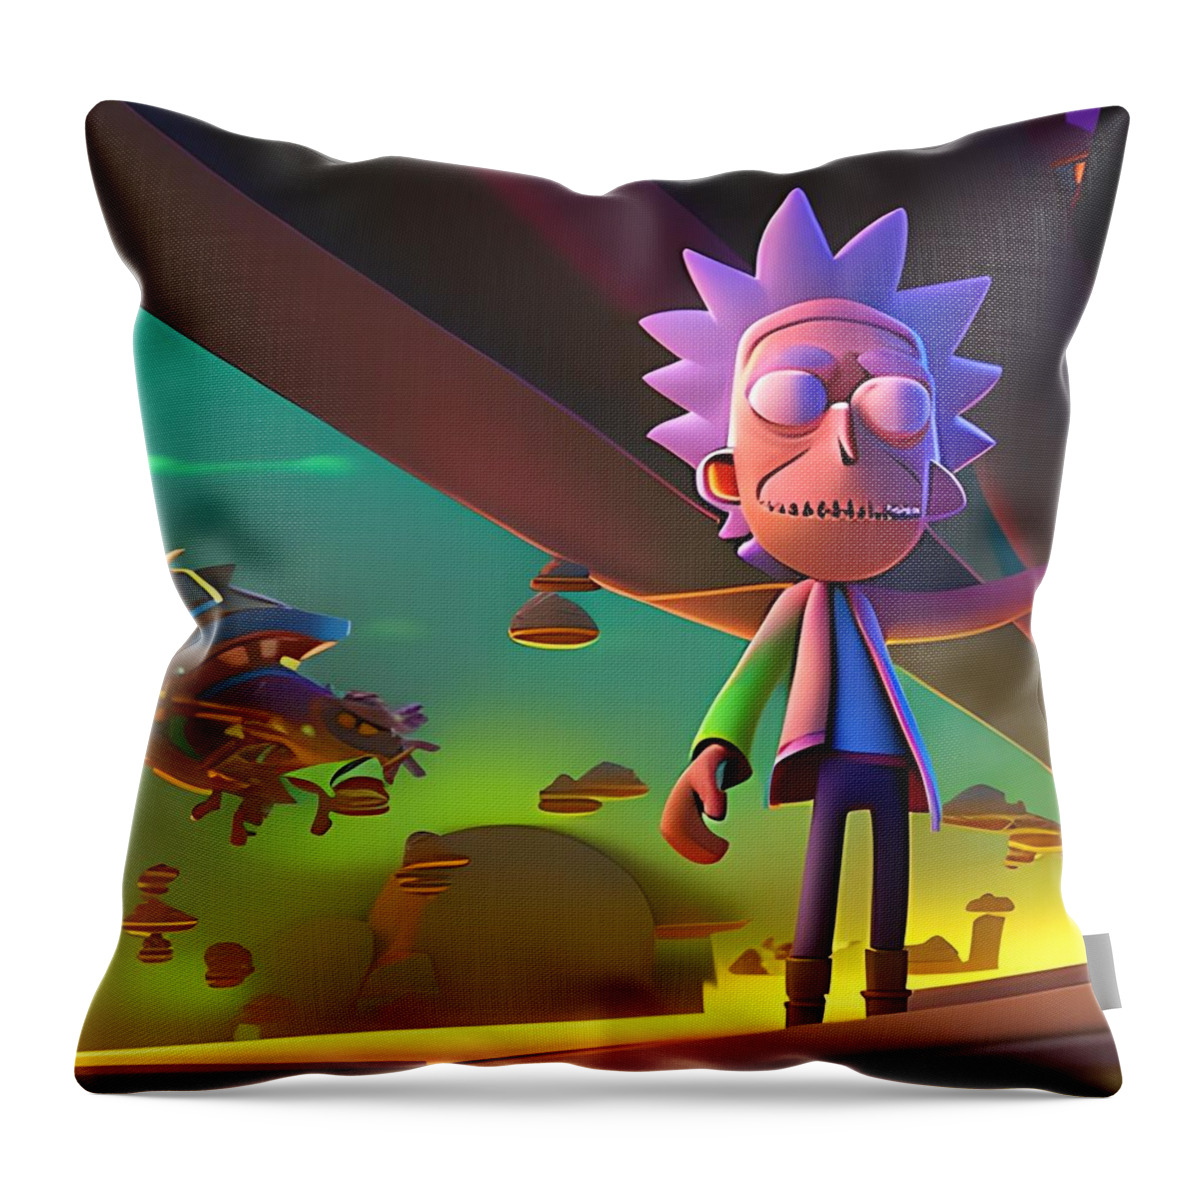 Rick And Morty Throw Pillow featuring the painting Rick And Morty by Wart